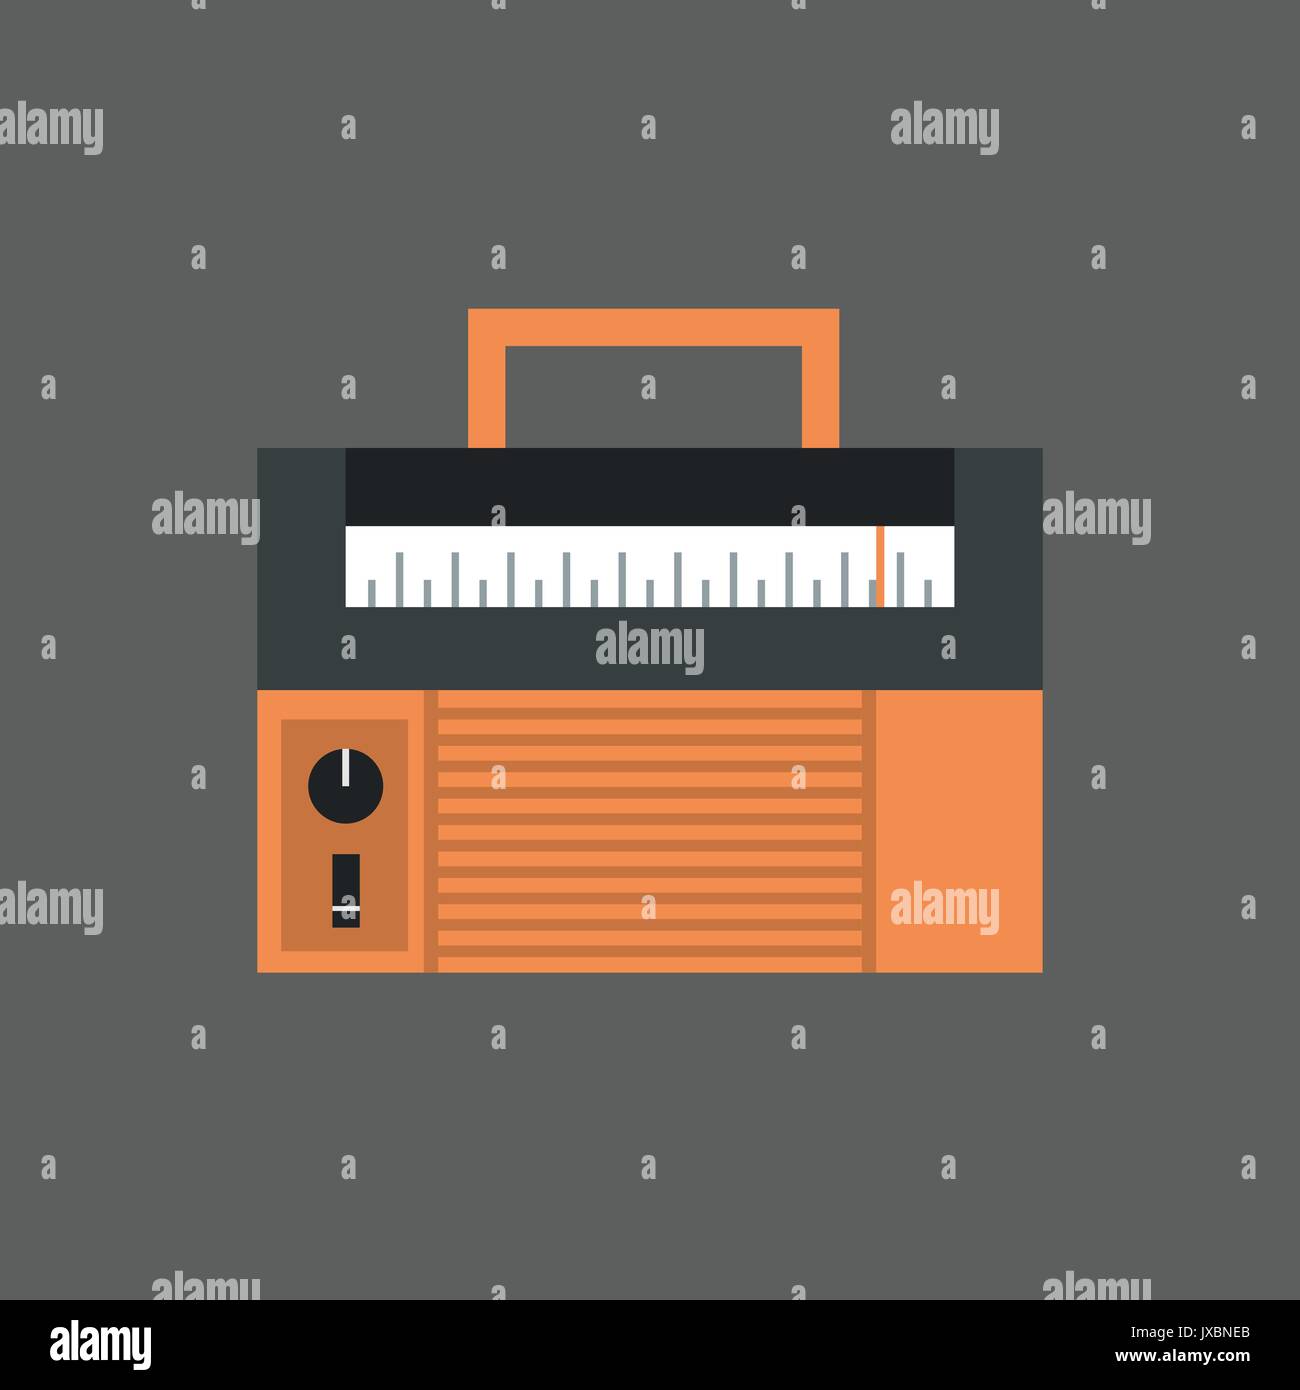 Tape Recorder Icon Modern Audio System Stock Vector